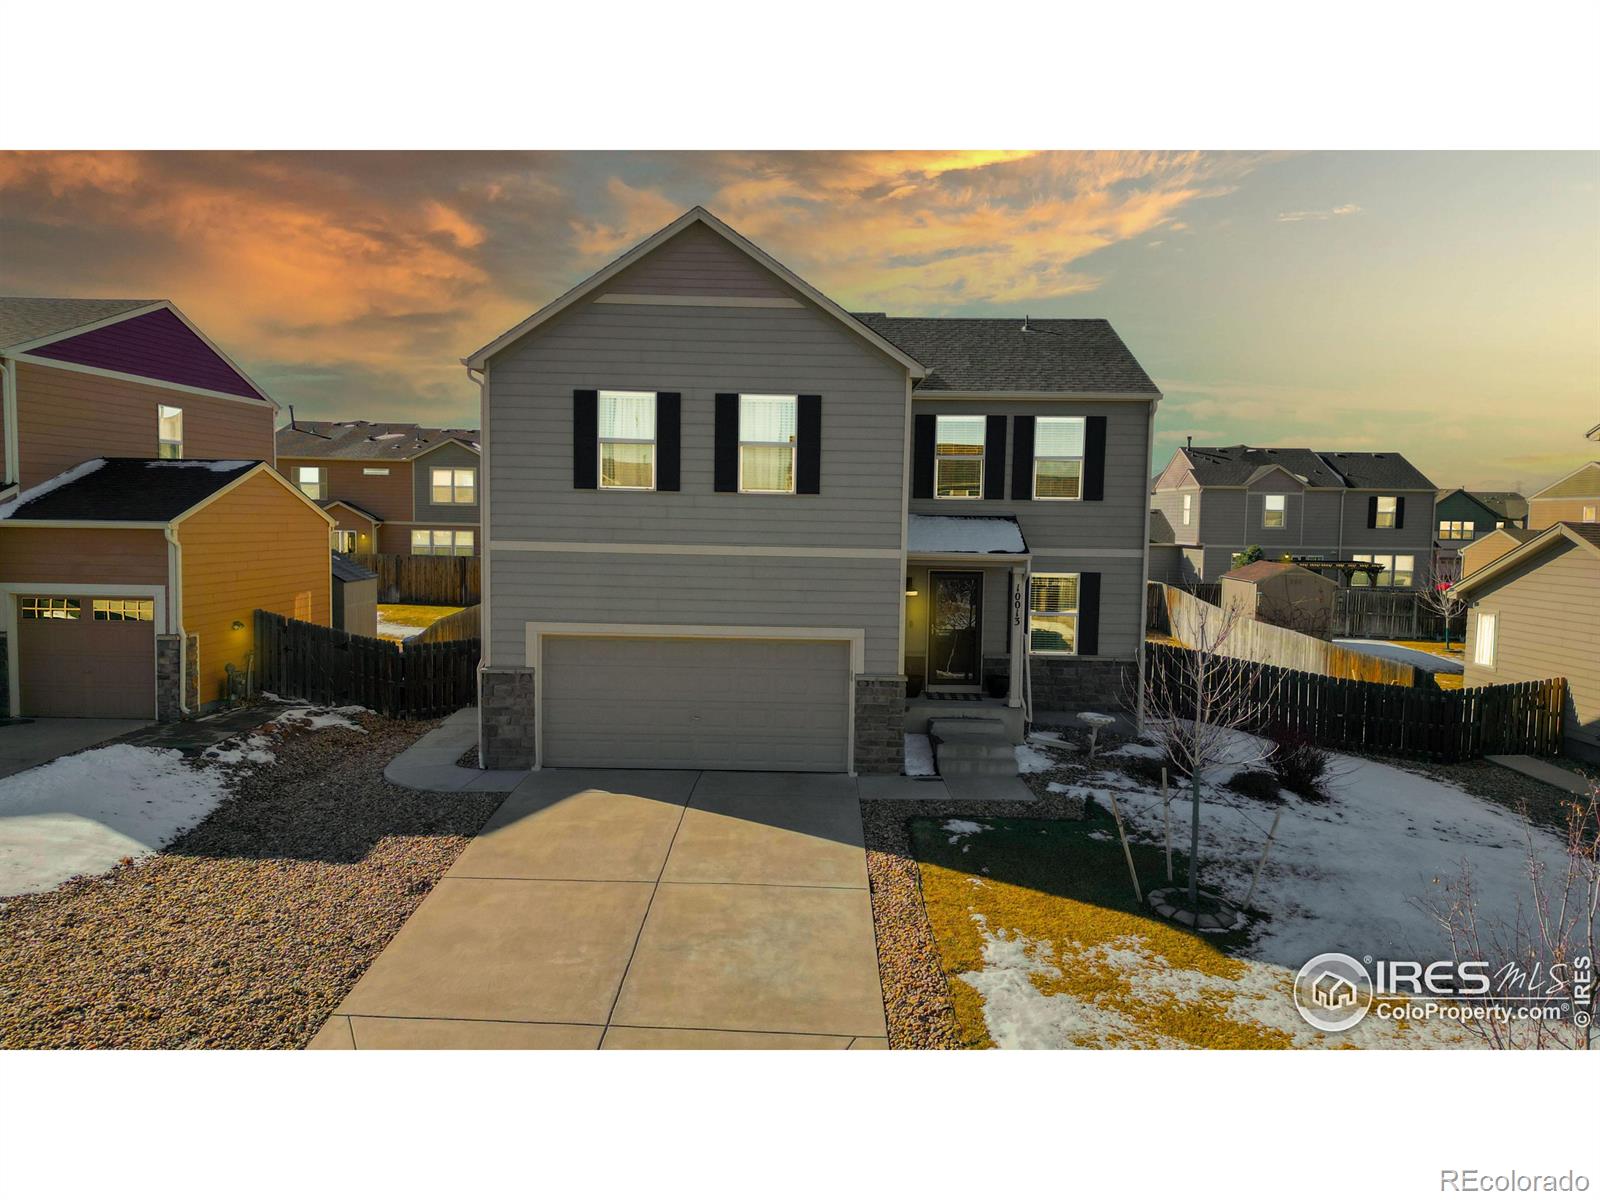 10013  Fairplay Street, commerce city MLS: 4567891003367 Beds: 3 Baths: 3 Price: $515,000